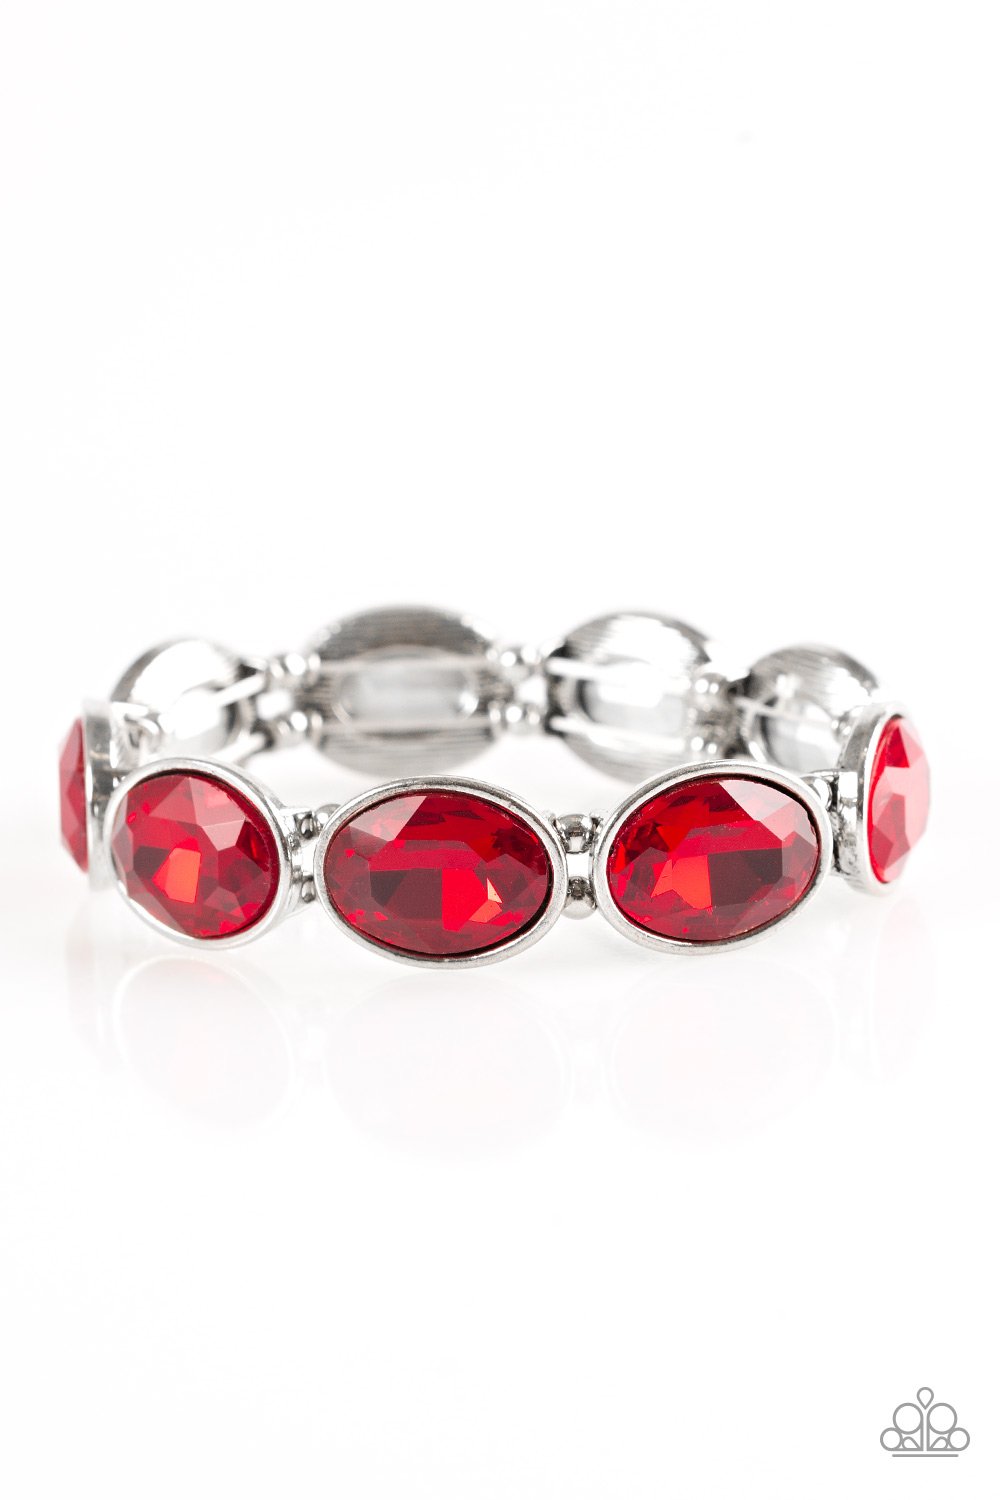 Paparazzi Bracelet ~ DIVA In Disguise - Red